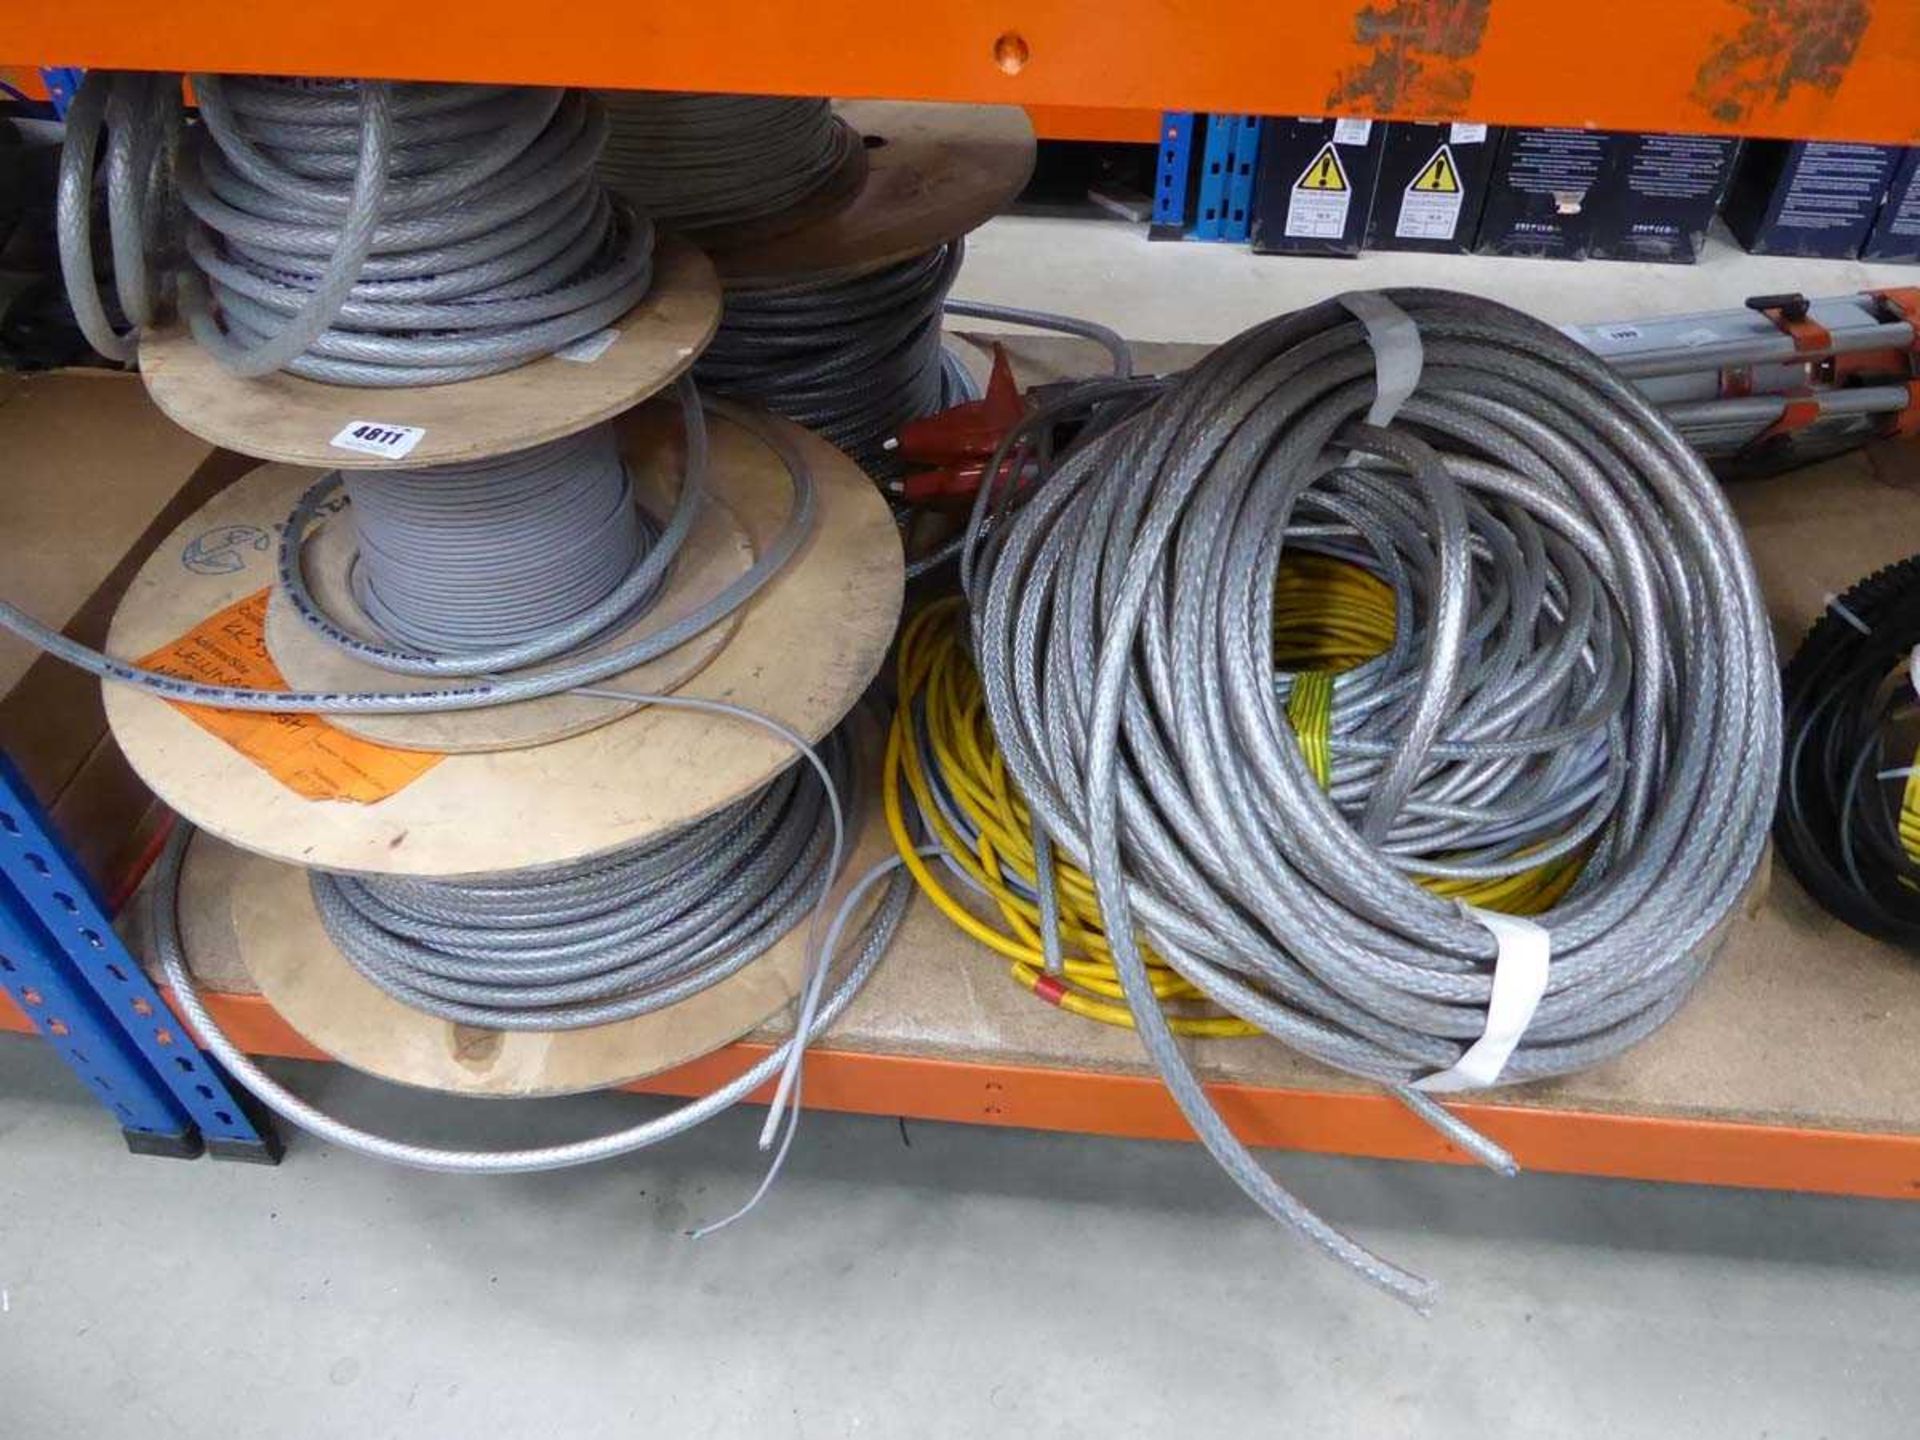 Large quantity of electrical cabling